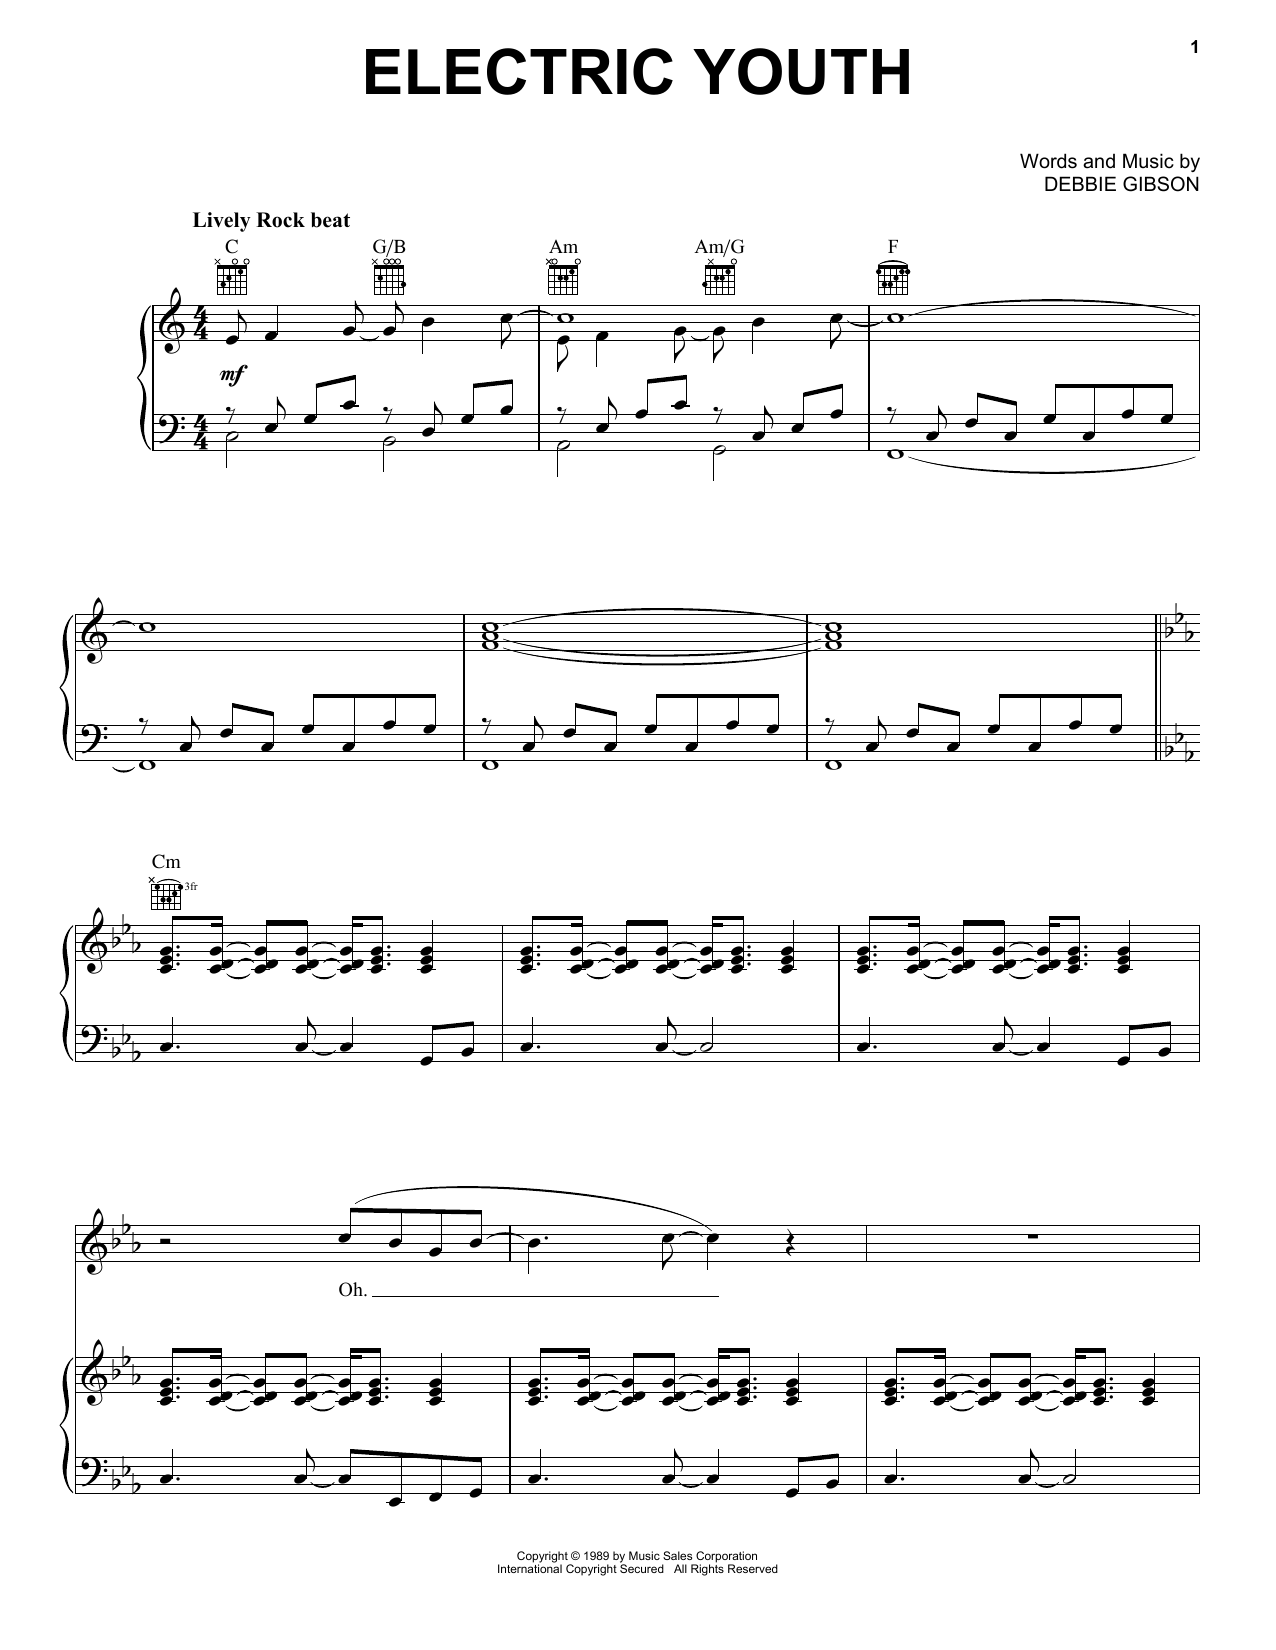 Download Debbie Gibson Electric Youth Sheet Music